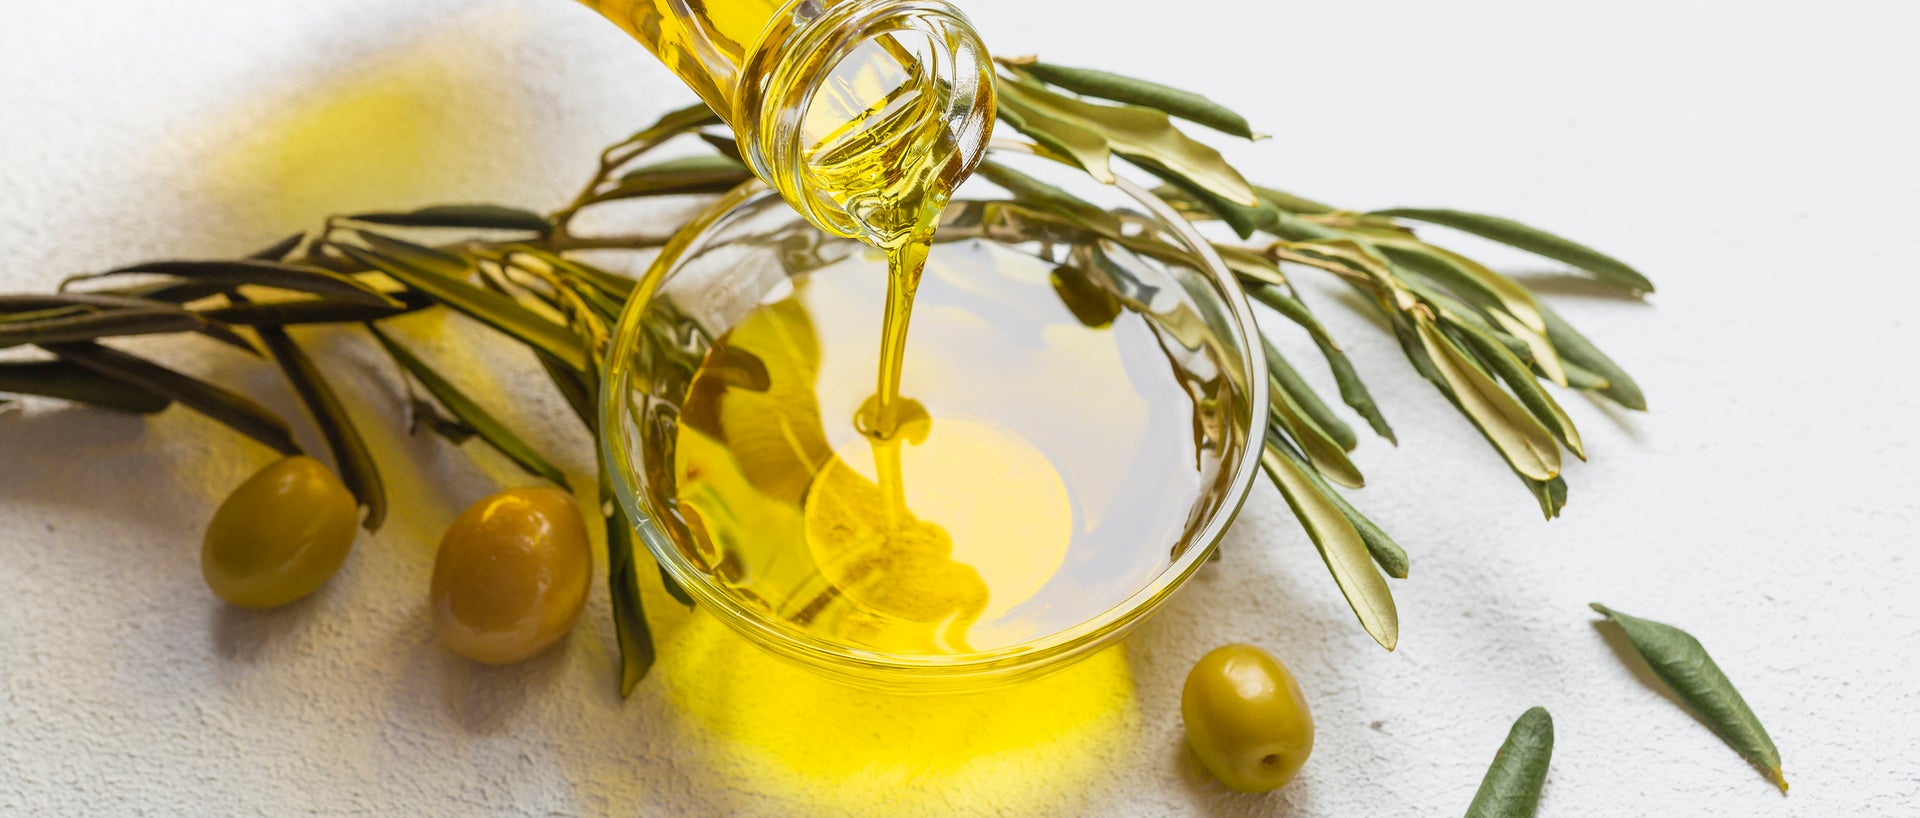 Jar of olive oil and olive branches on white background